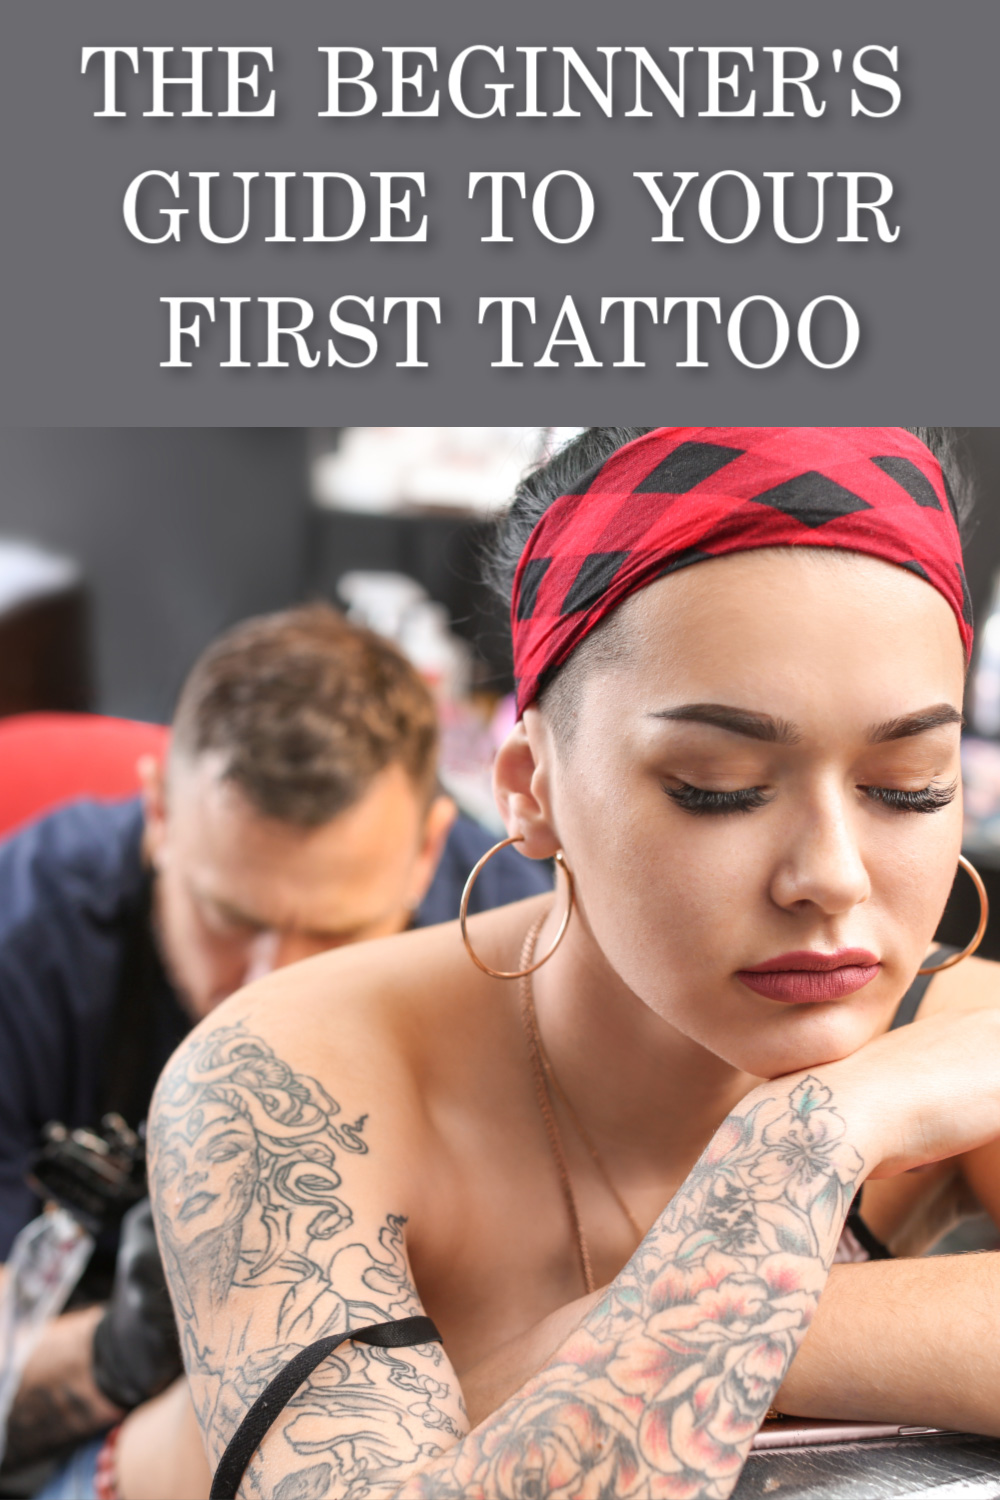 The Beginner's Guide To Your First Tattoo